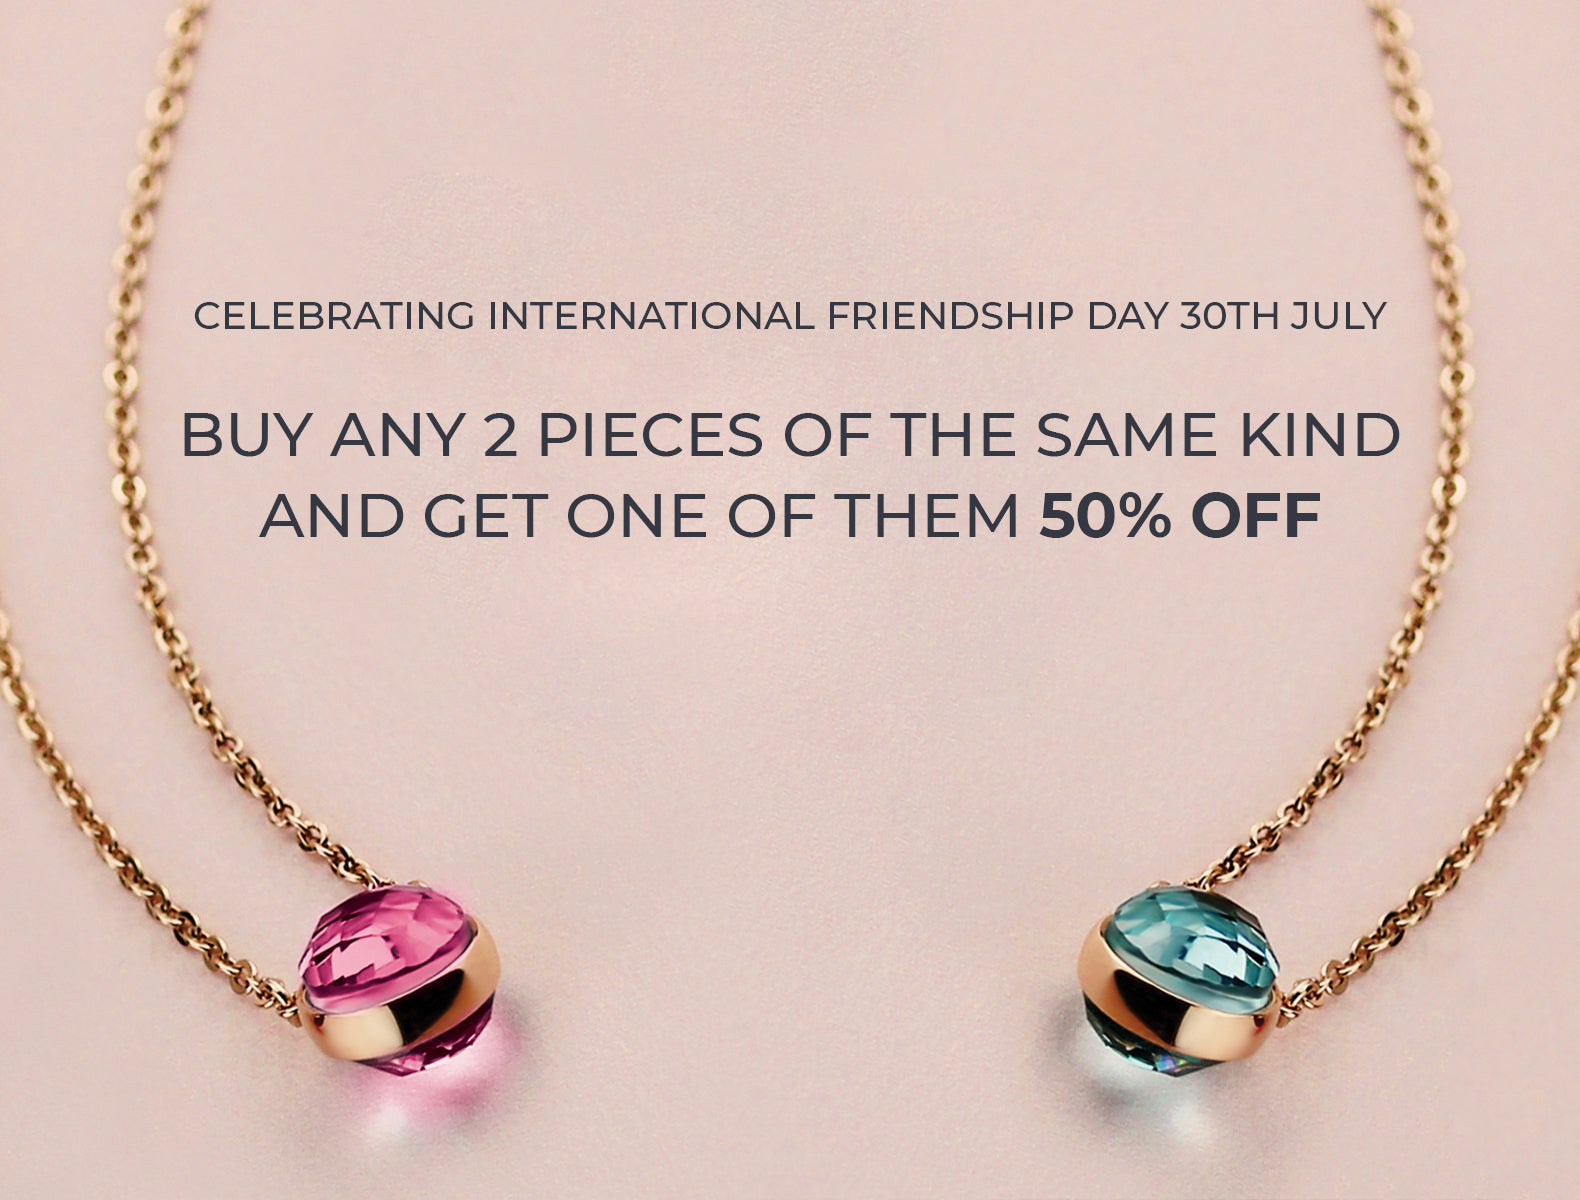 FRIENDSHIP OFFER - GOOD THINGS COME IN TWOS